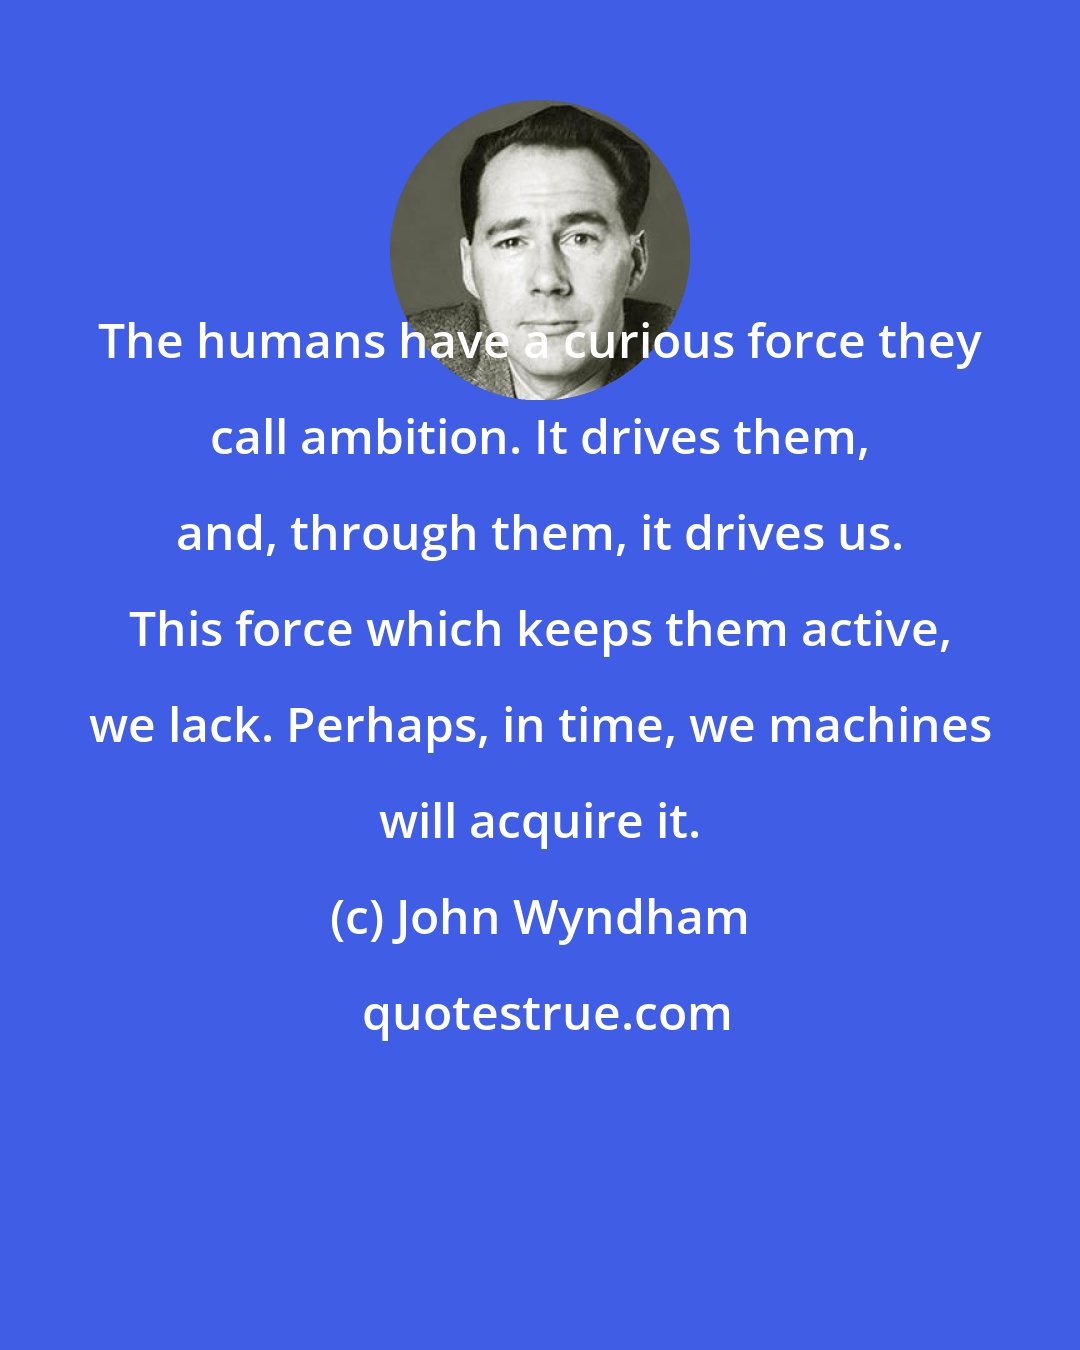 John Wyndham: The humans have a curious force they call ambition. It drives them, and, through them, it drives us. This force which keeps them active, we lack. Perhaps, in time, we machines will acquire it.